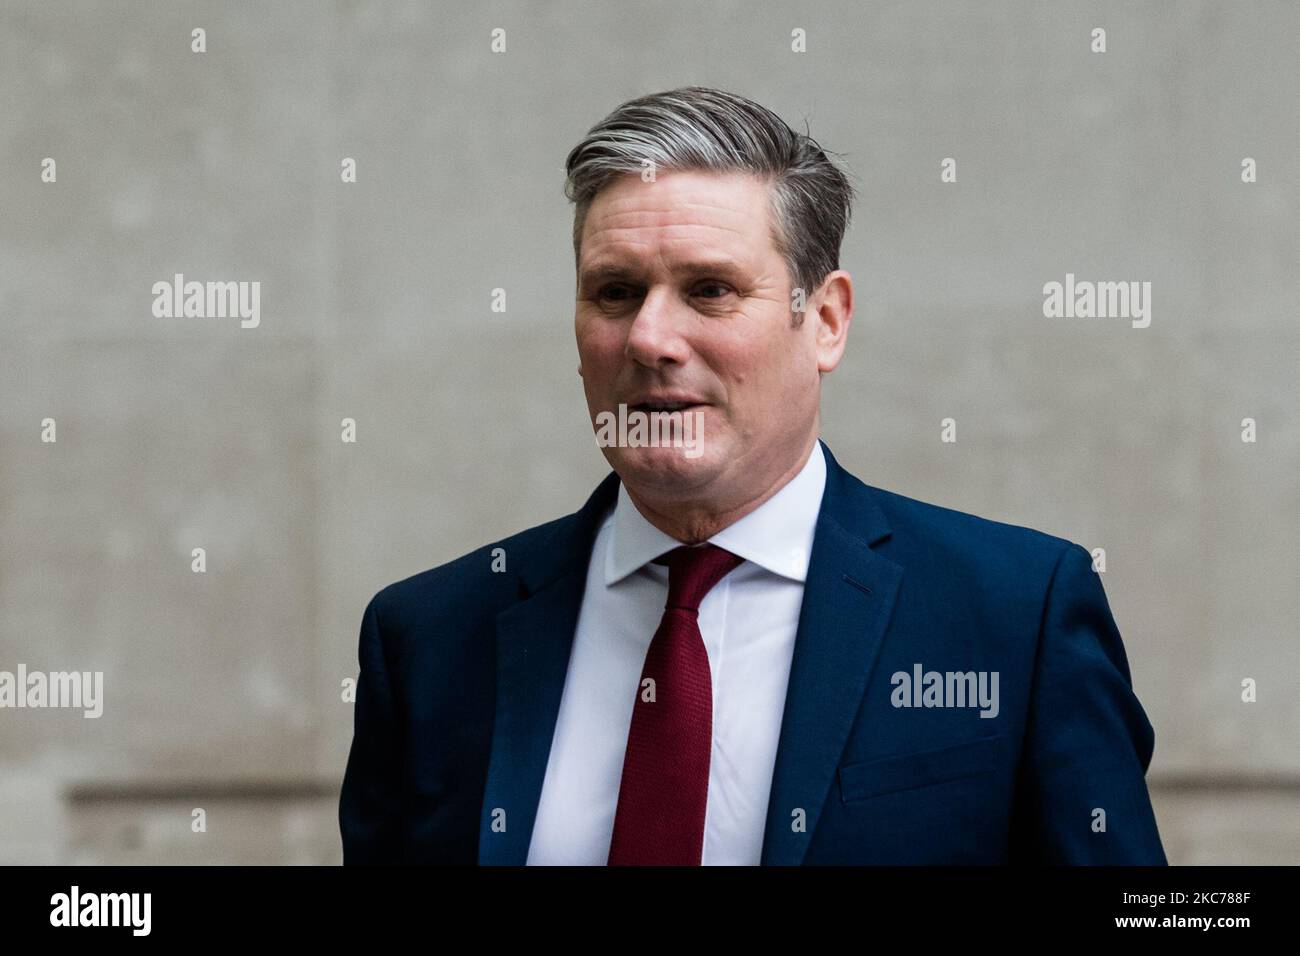 Labour Party Leader Sir Keir Starmer arrives at the BBC Broadcasting House in central London to appear on The Andrew Marr Show, on 10 January 2021 in London, England. (Photo by WIktor Szymanowicz/NurPhoto) Stock Photo